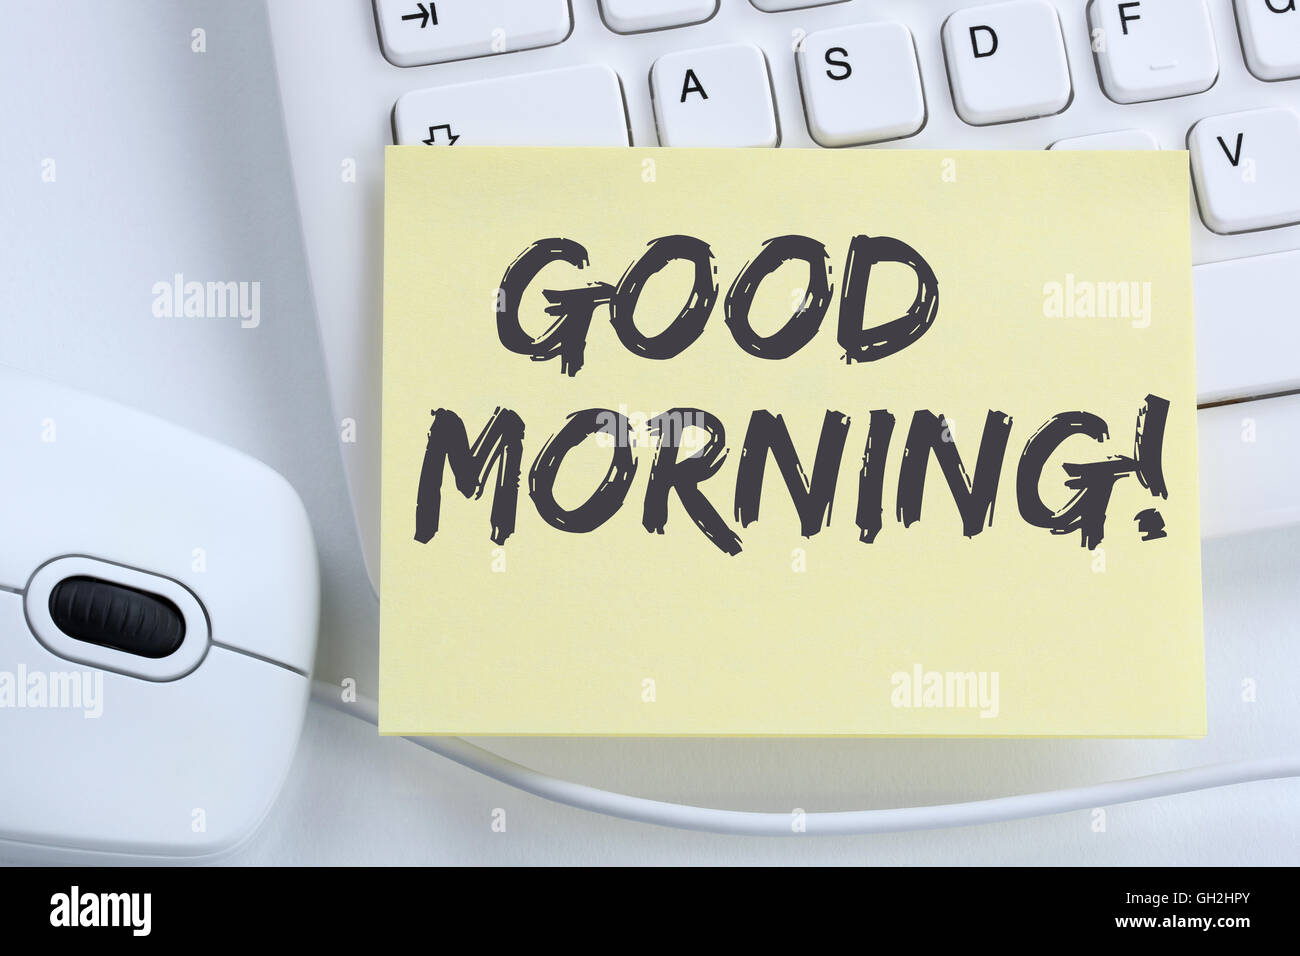 Good morning hello greeting welcome message business concept office computer keyboard Stock Photo